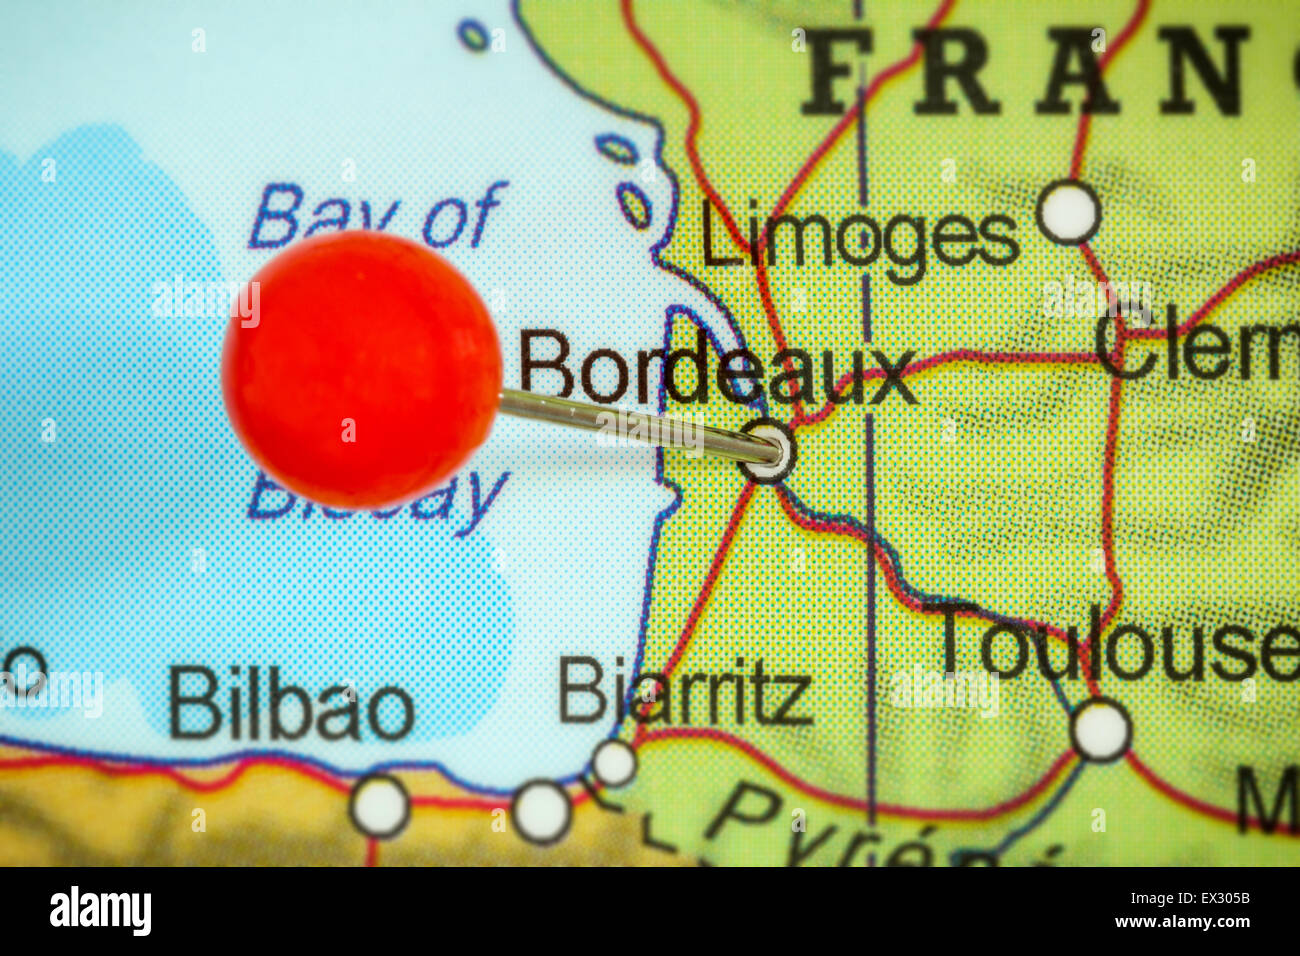 Of bordeaux france map The 12